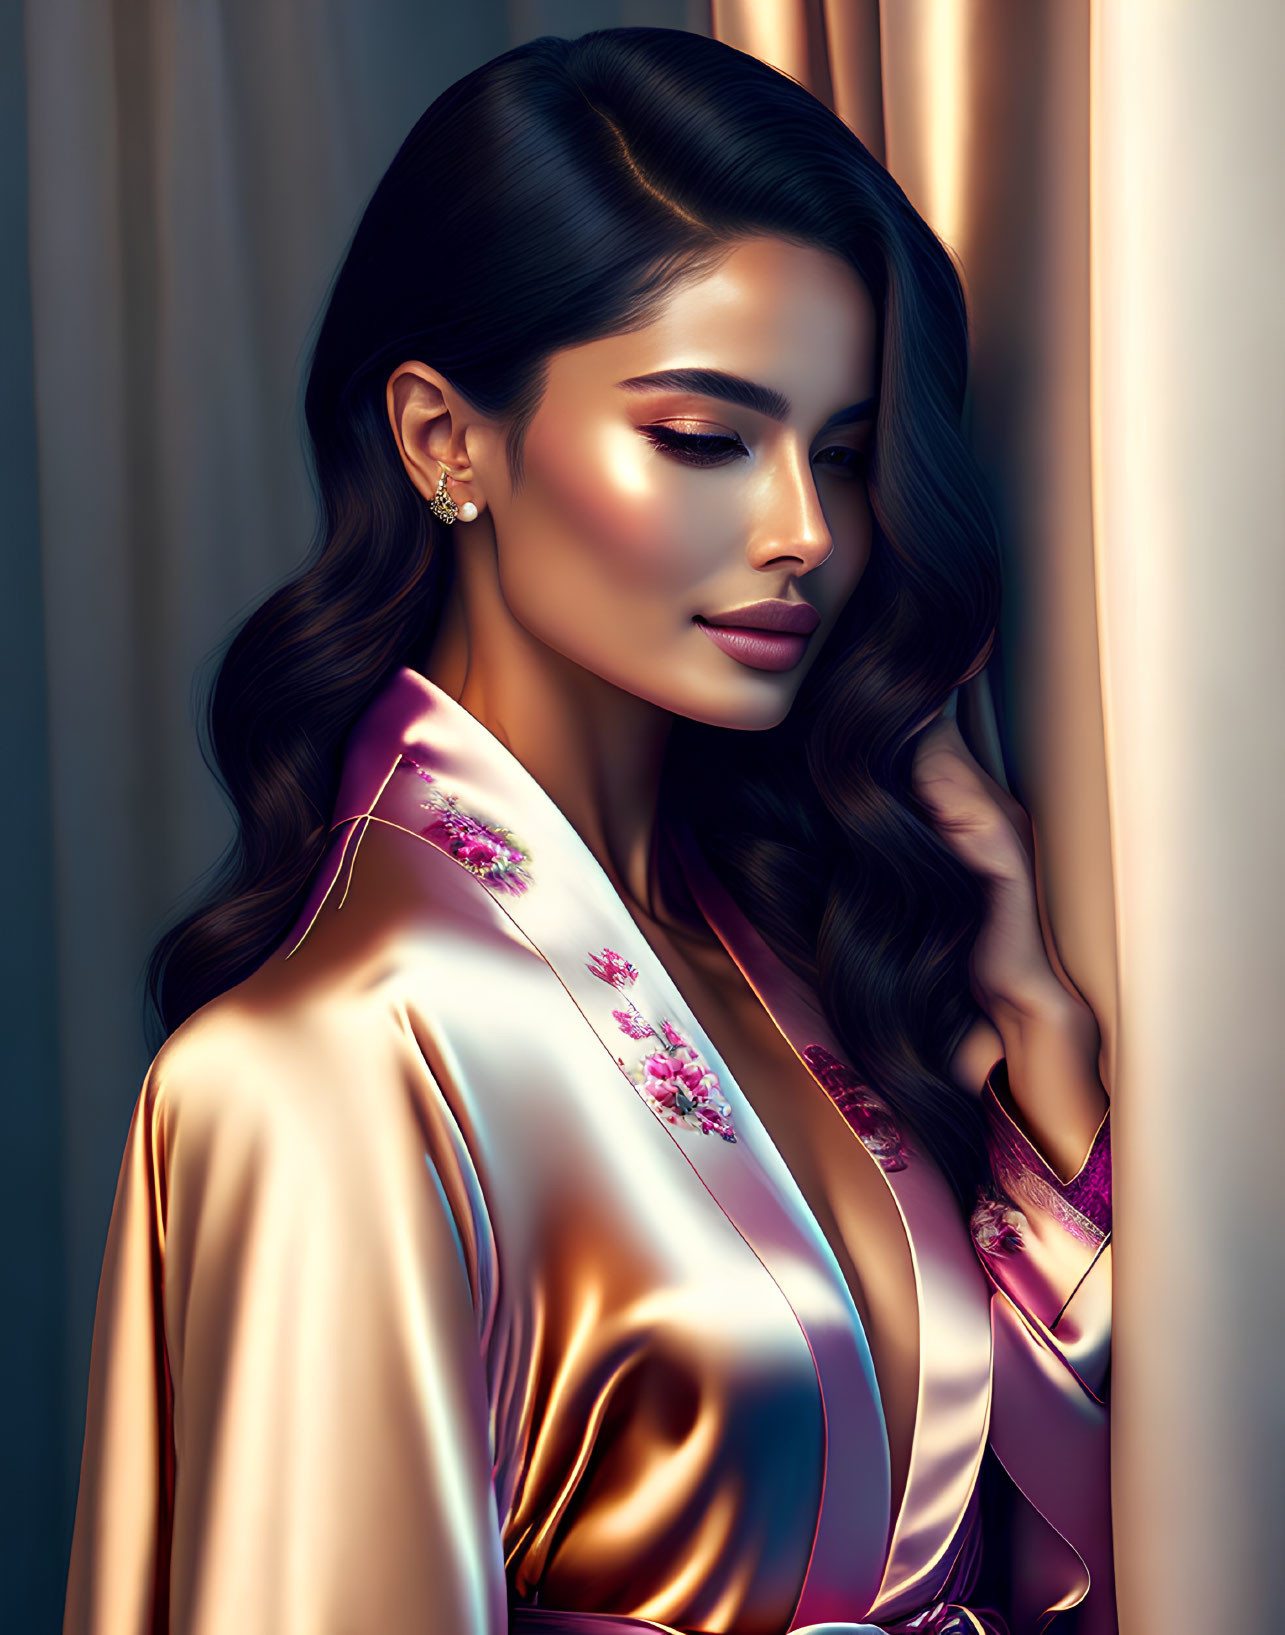 Sleek hairstyle and floral robe beside draped curtain